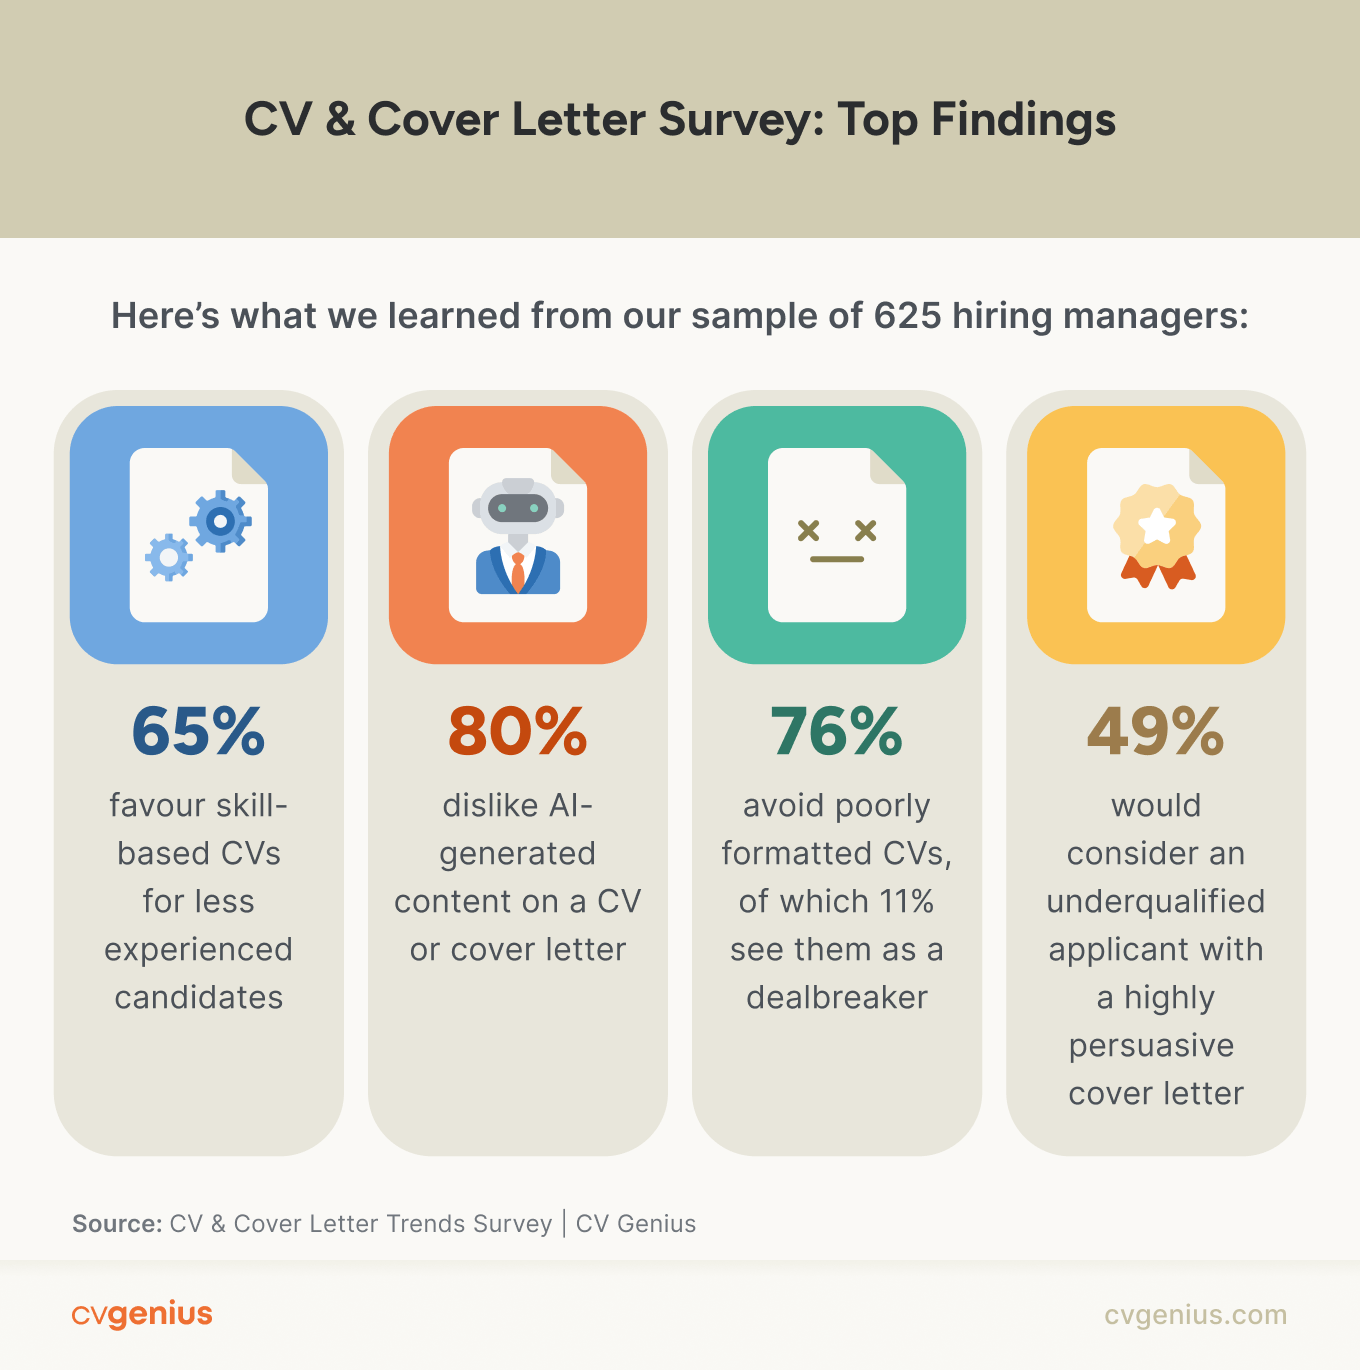 An infographic illustrating four of the top findings from the CV Genius CV & Cover Letter Survey.